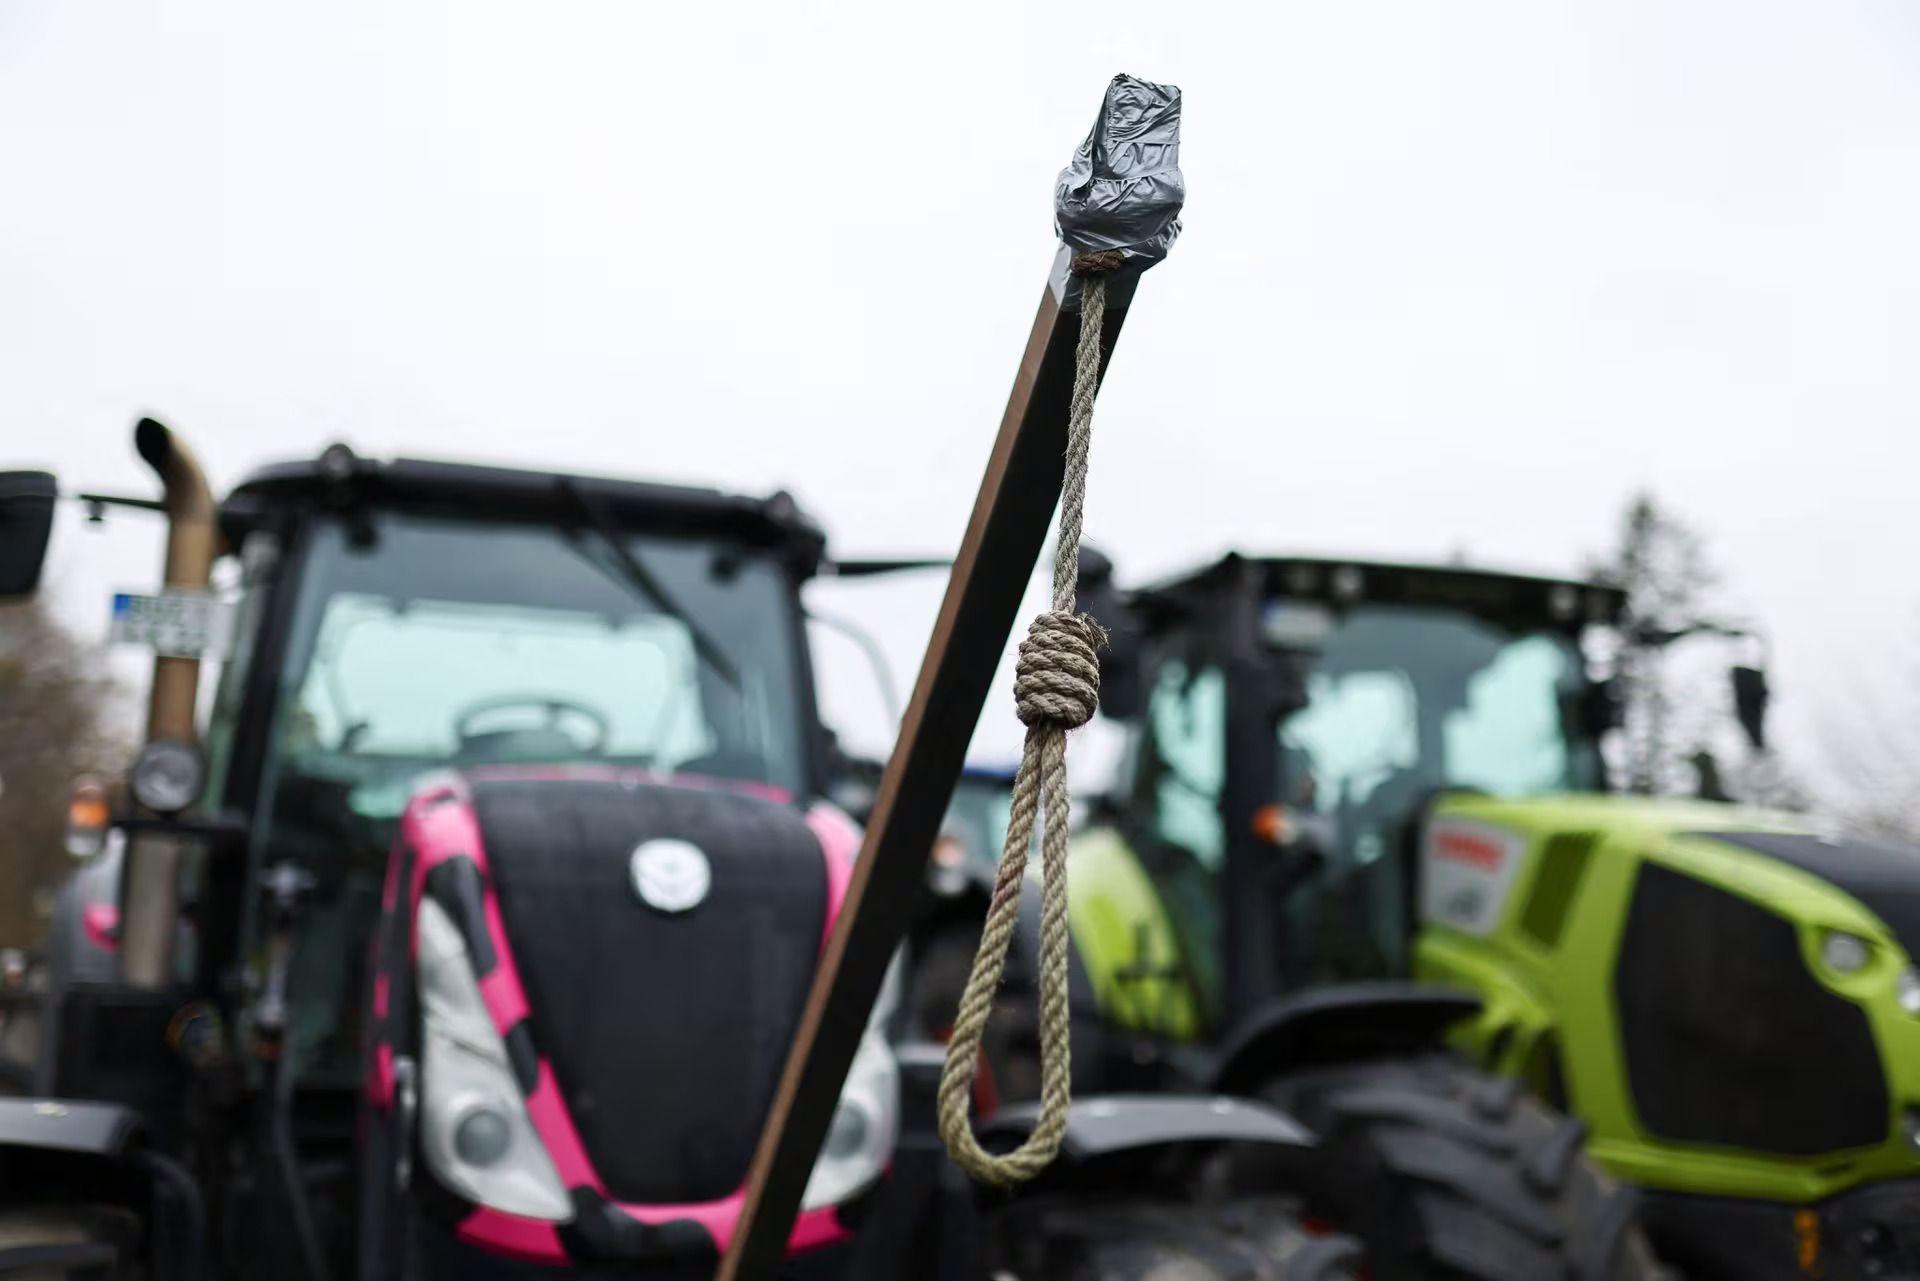 Rising extremism in Europe: Far-right symbols seen in German farmer protests